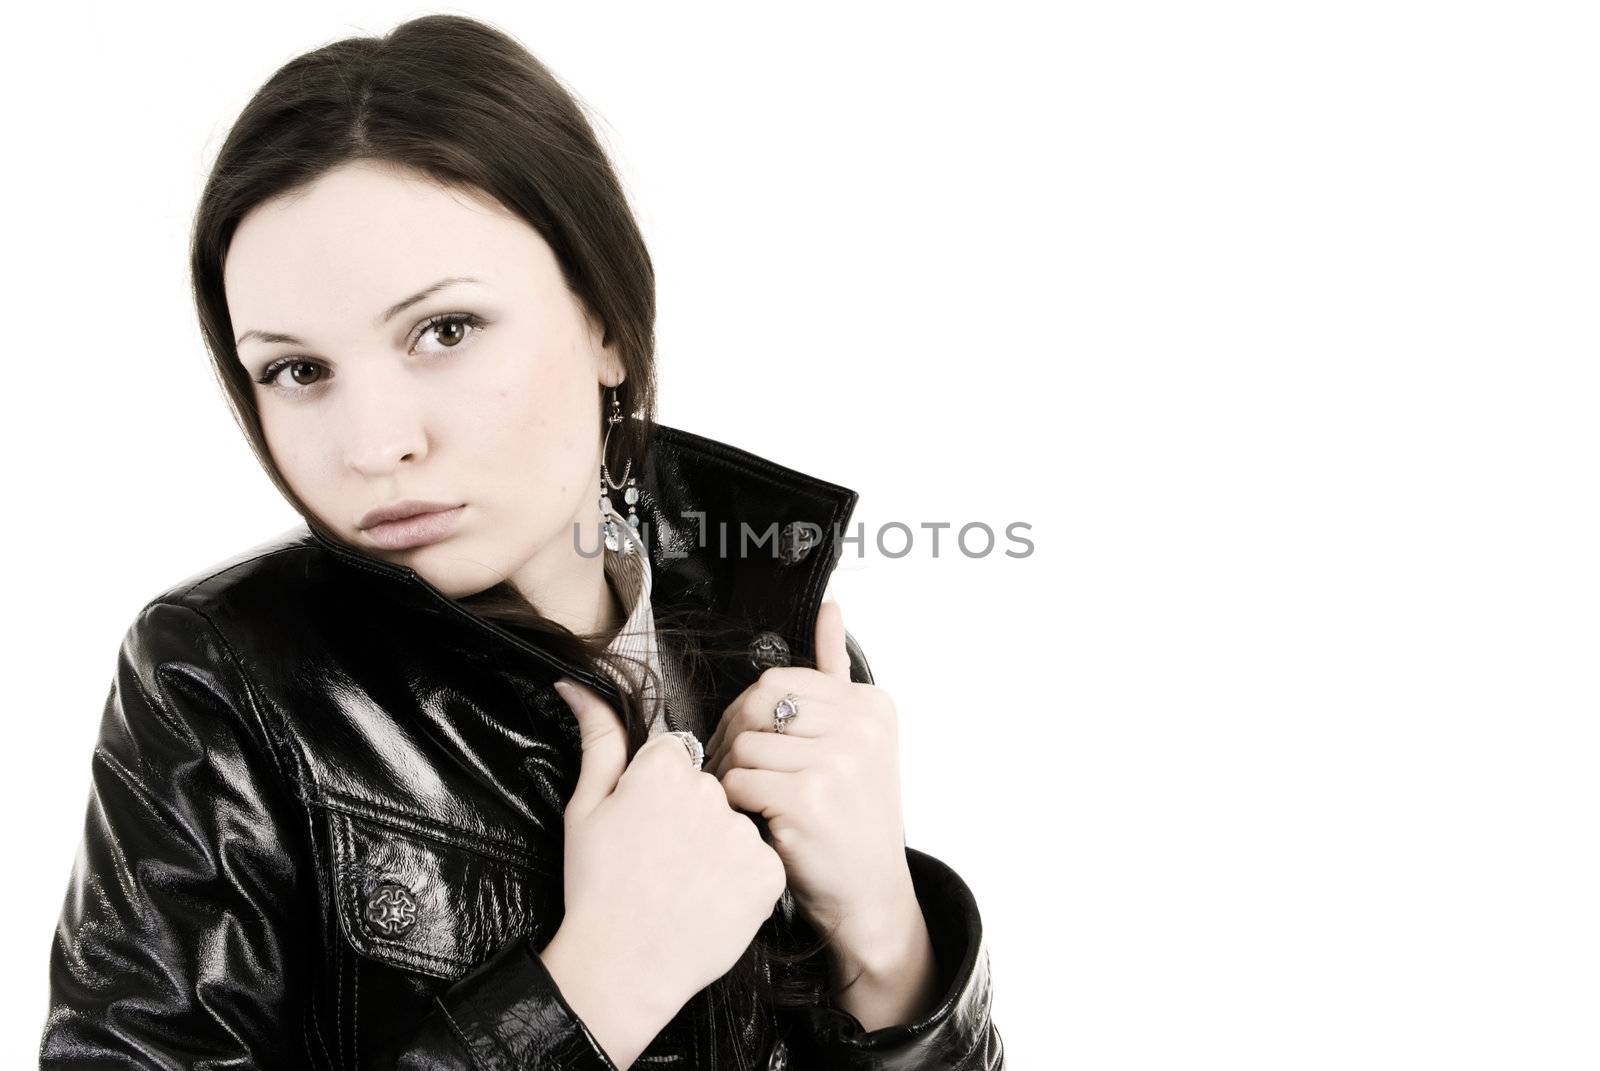  young girl in leather jacket  isolated on white